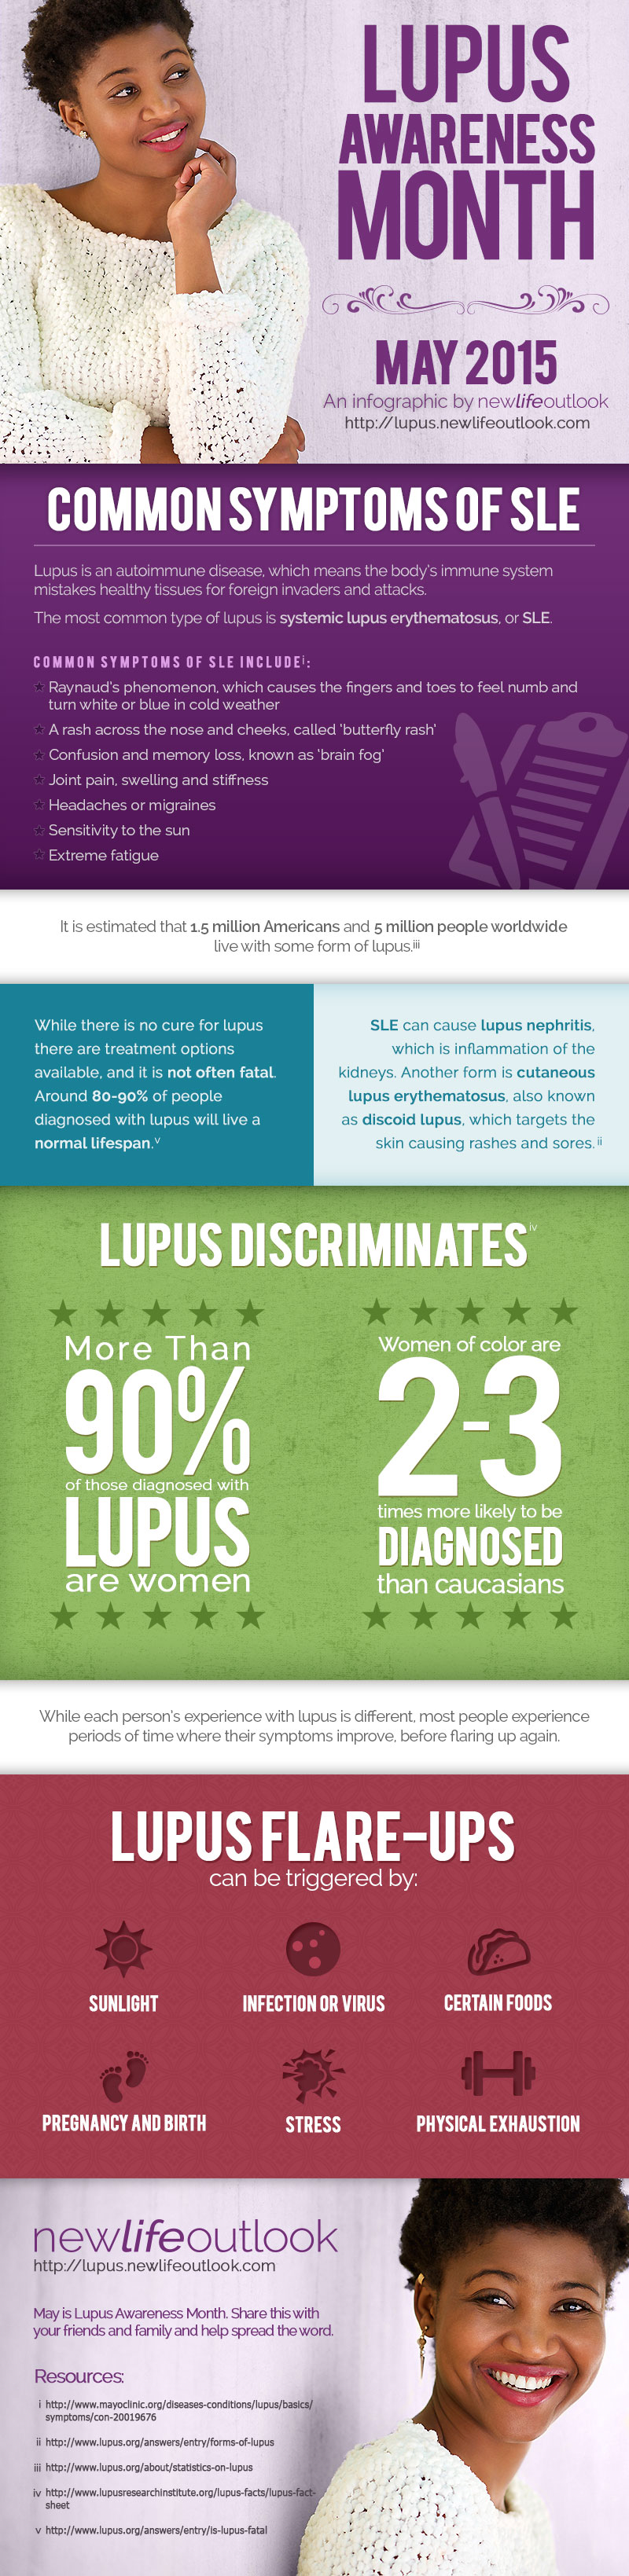 Lupus Infographic - Why Bother with Lupus Awareness Month?